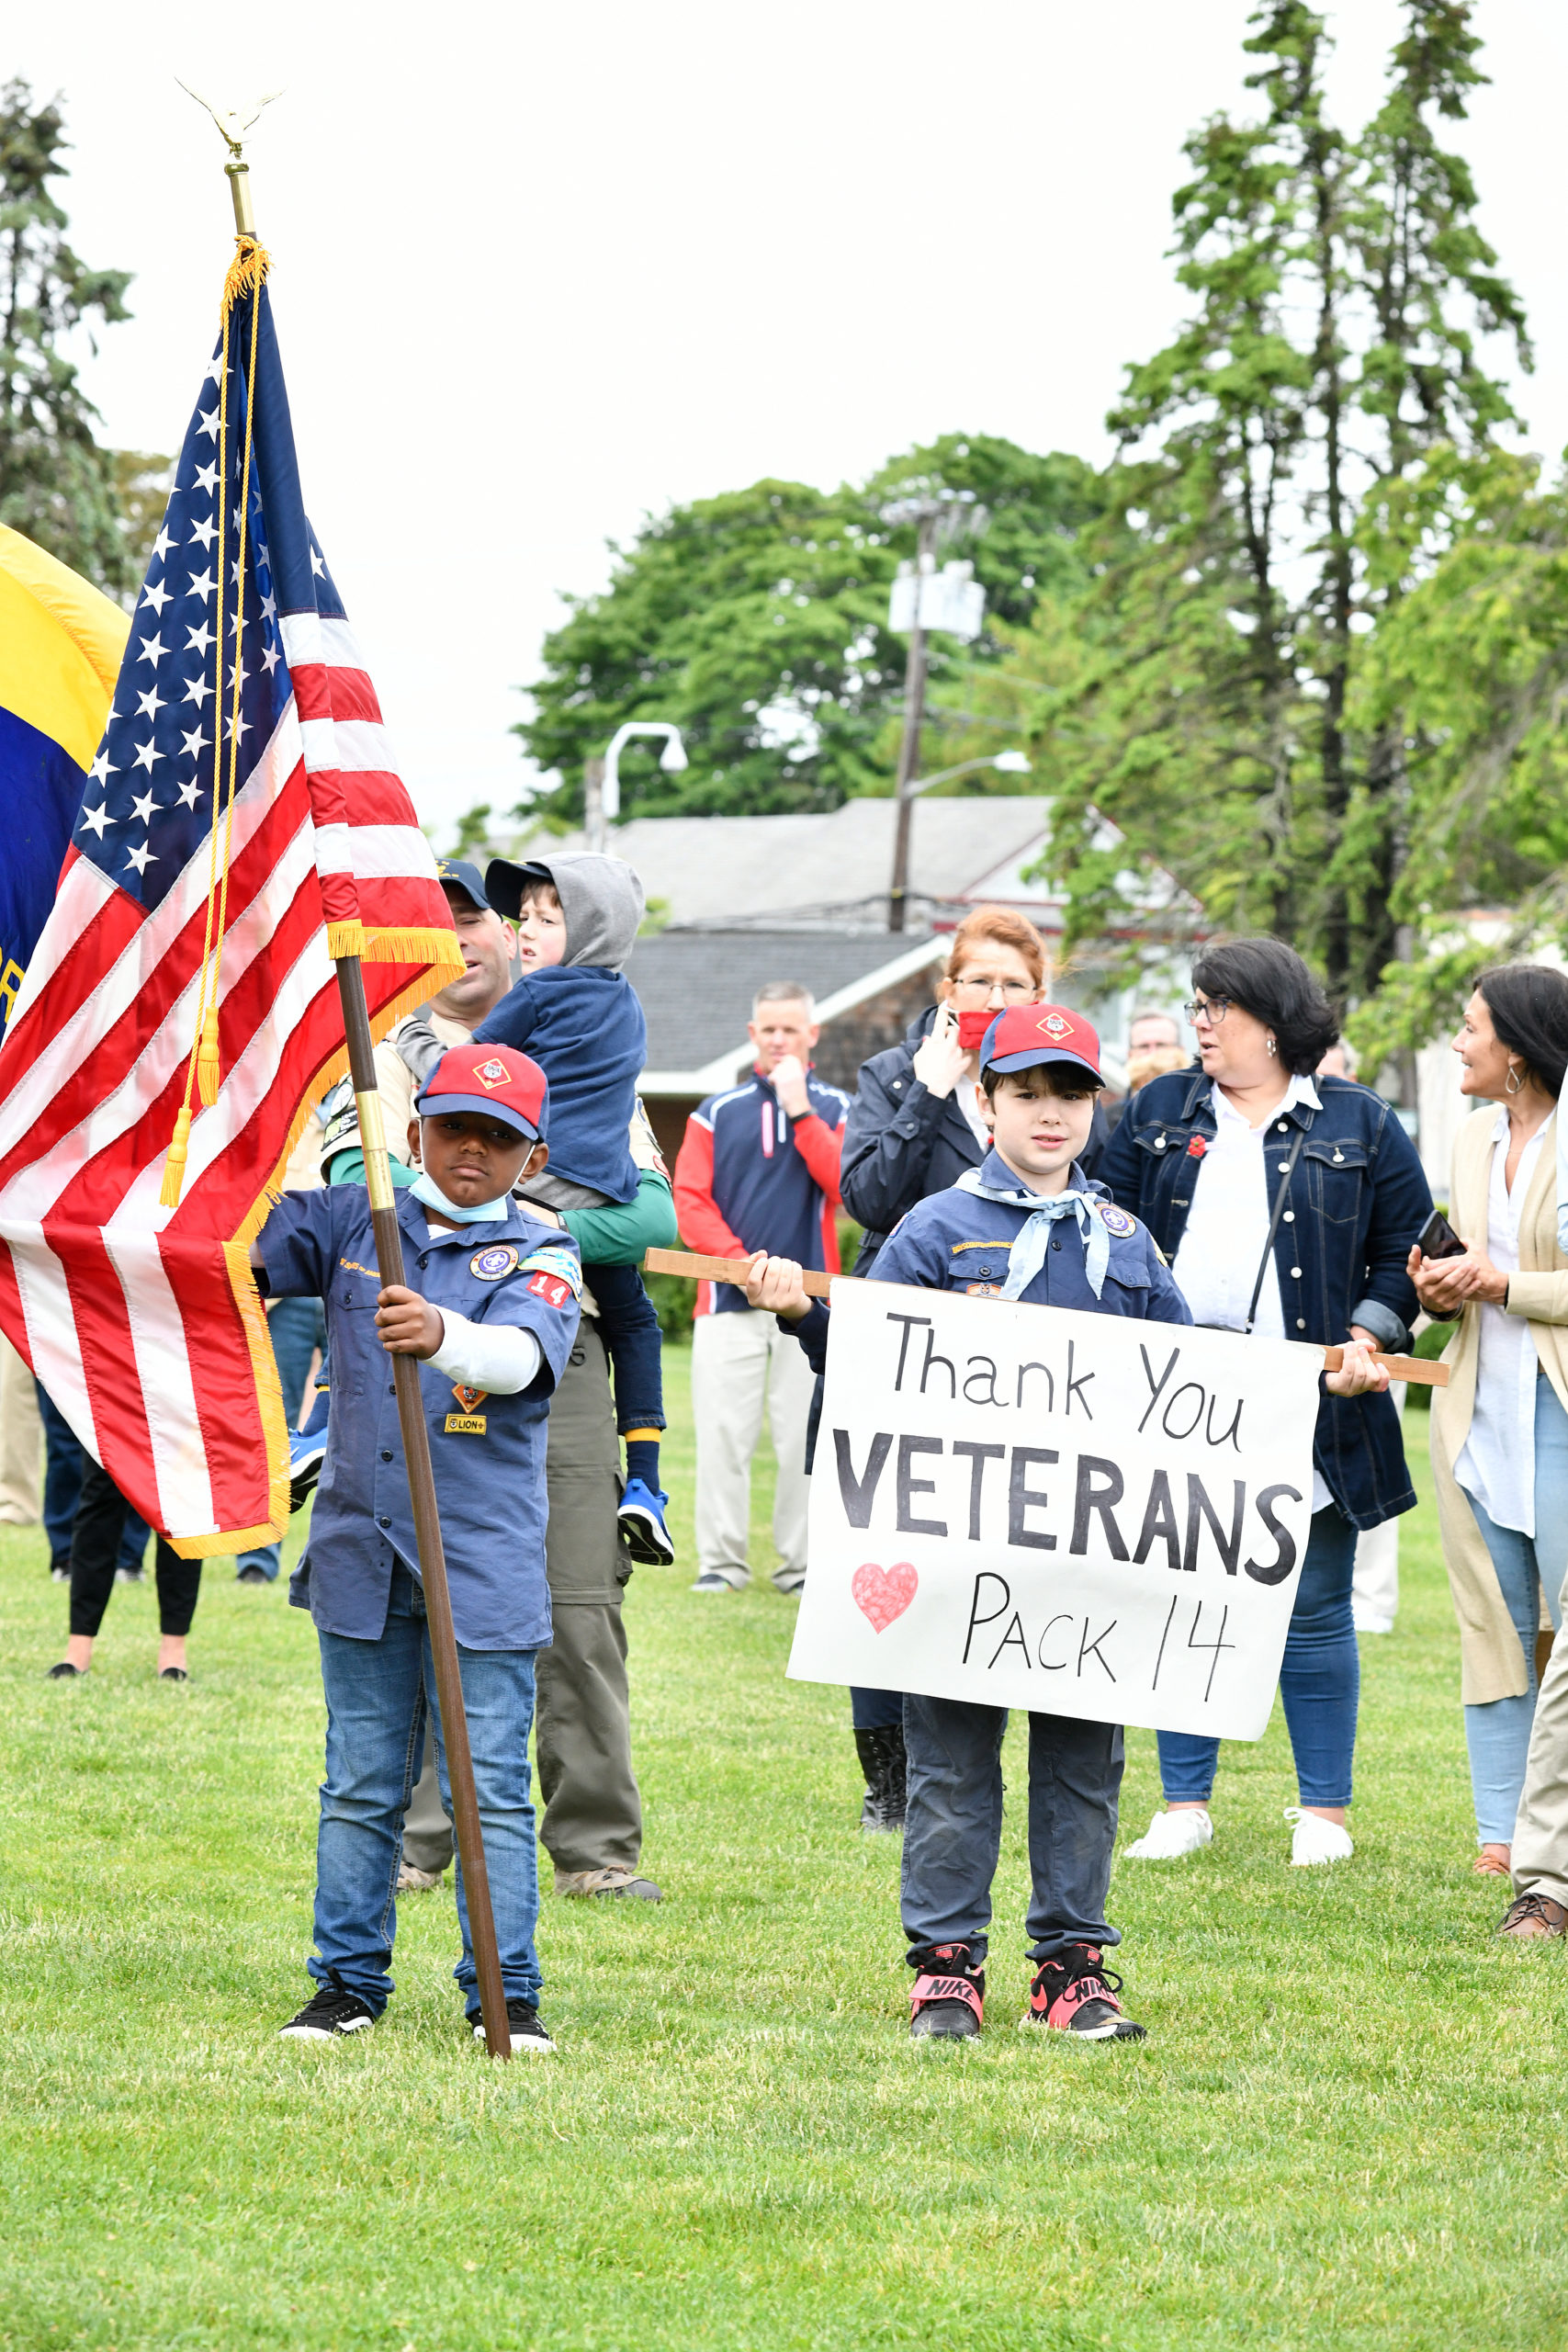 Members of Cub Scout Pack 14 at Memorial Day services in Agawam Park in Southampton Village on Monday.    DANA SHAW